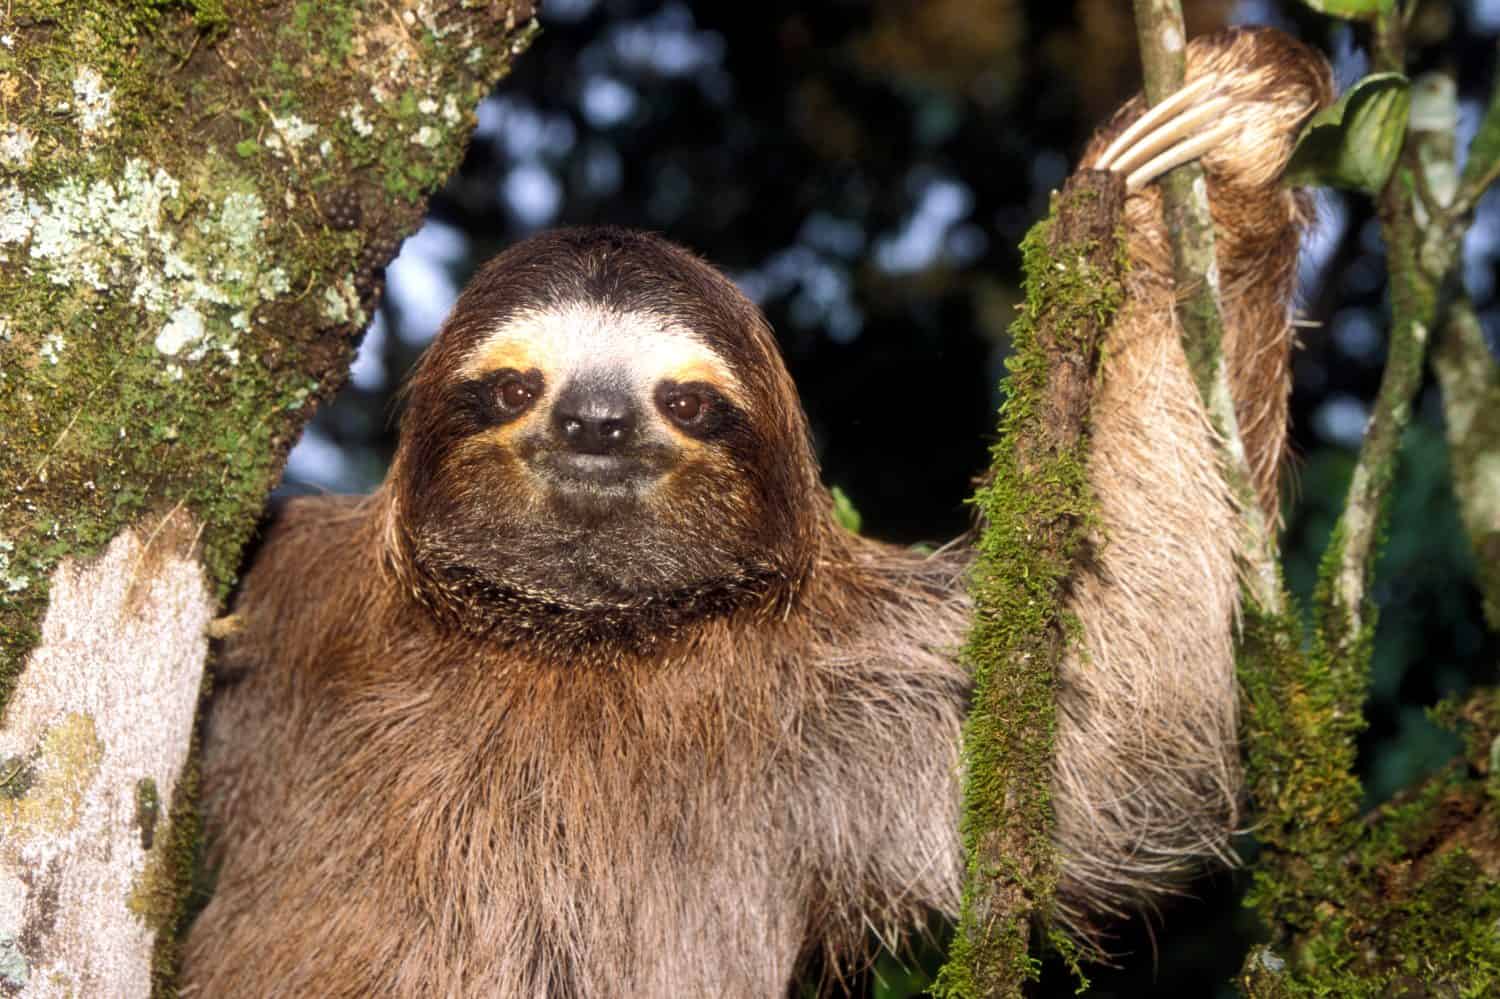 Pale Throated Sloth